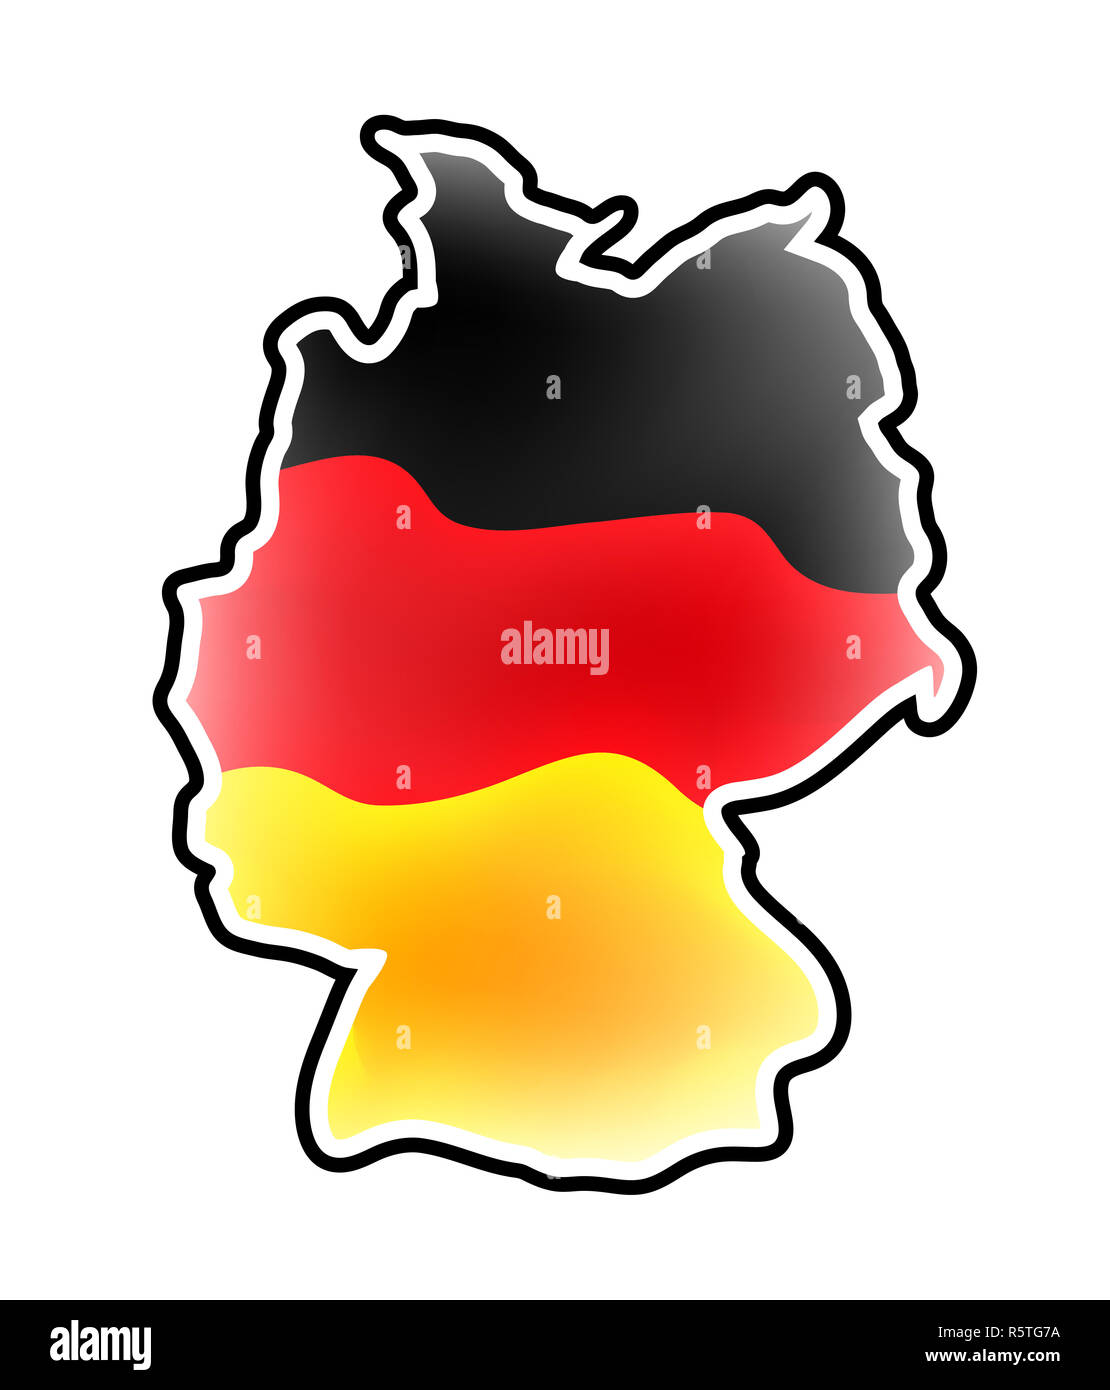 Germany Map Vector Symbol Icon Design German Flag Colors Illustration Isolated On White Background Stock Photo Alamy